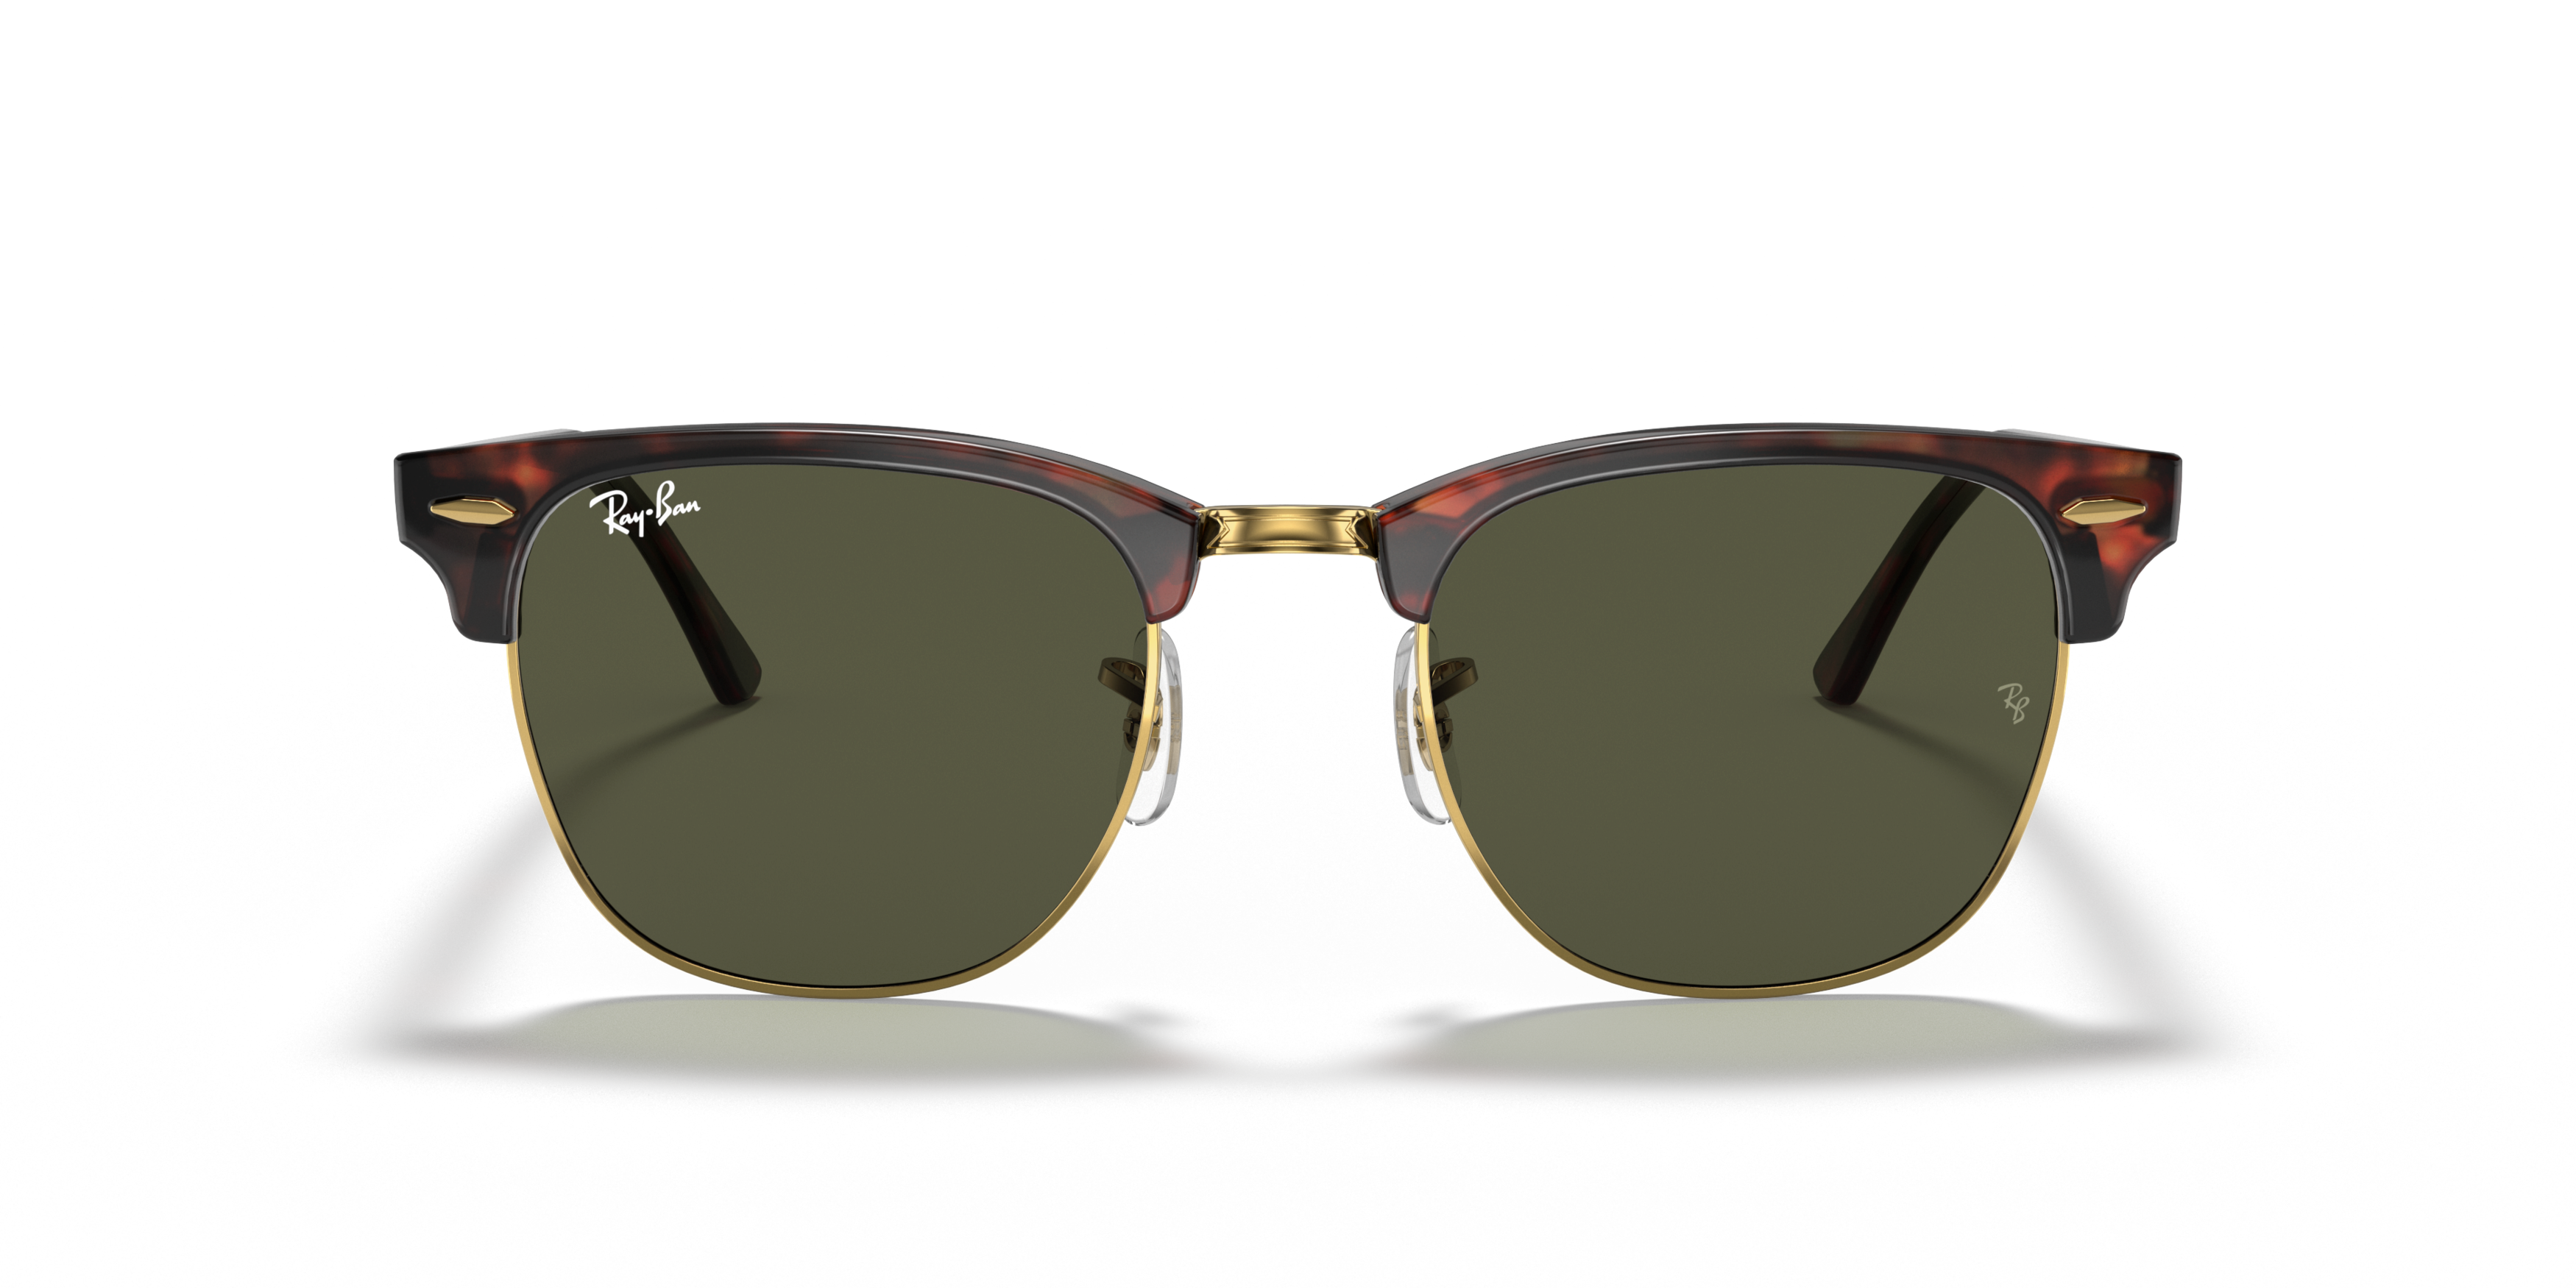 [products.image.front] Ray-Ban Clubmaster RB3016 W0366